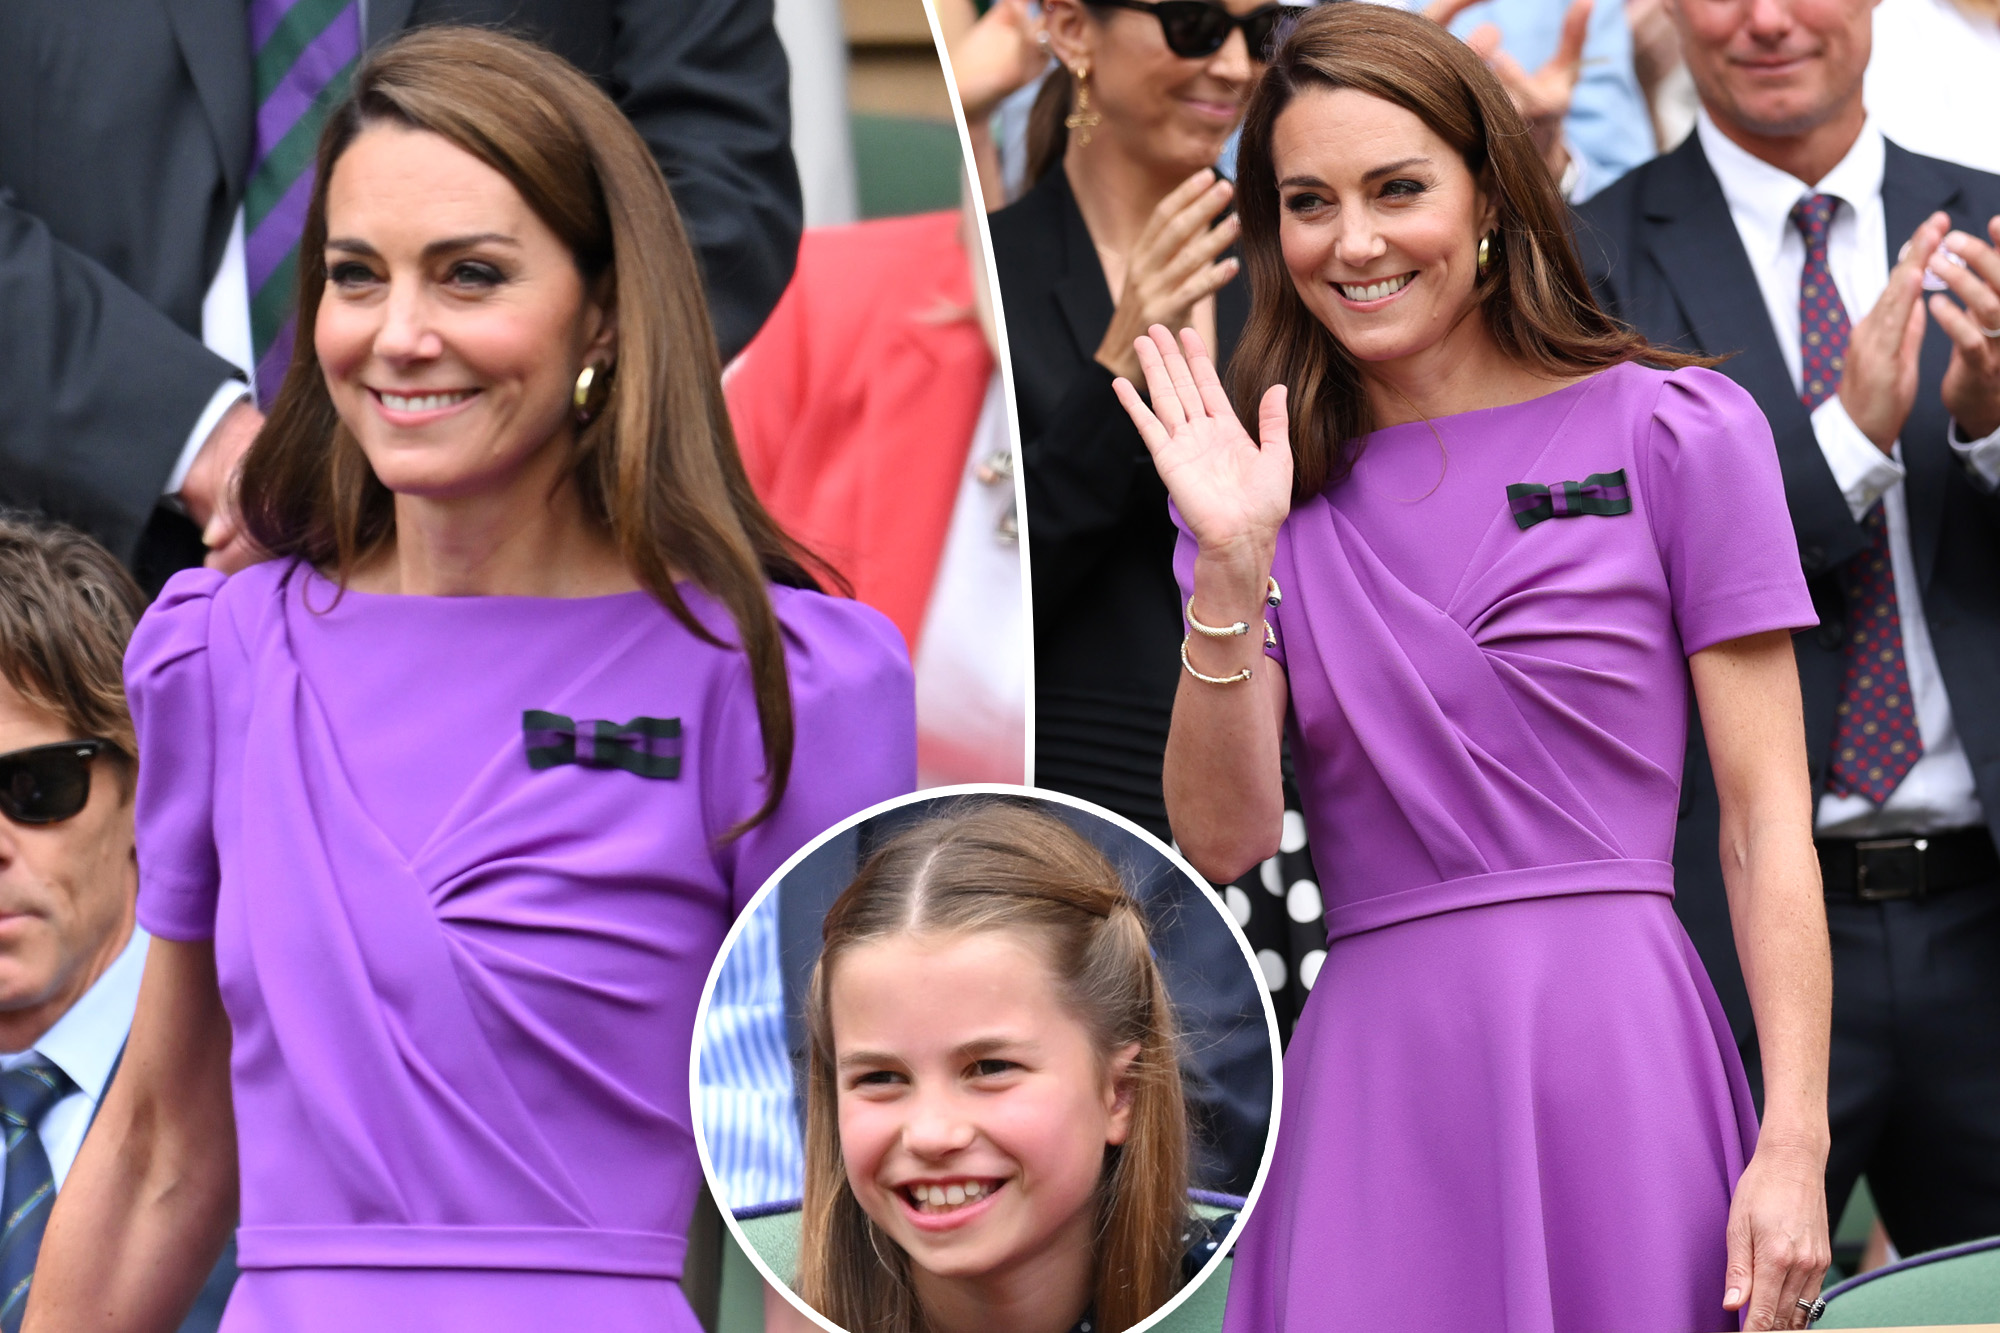 Kate Middleton's Stylish Wimbledon Outing with Princess Charlotte Sparks Excitement